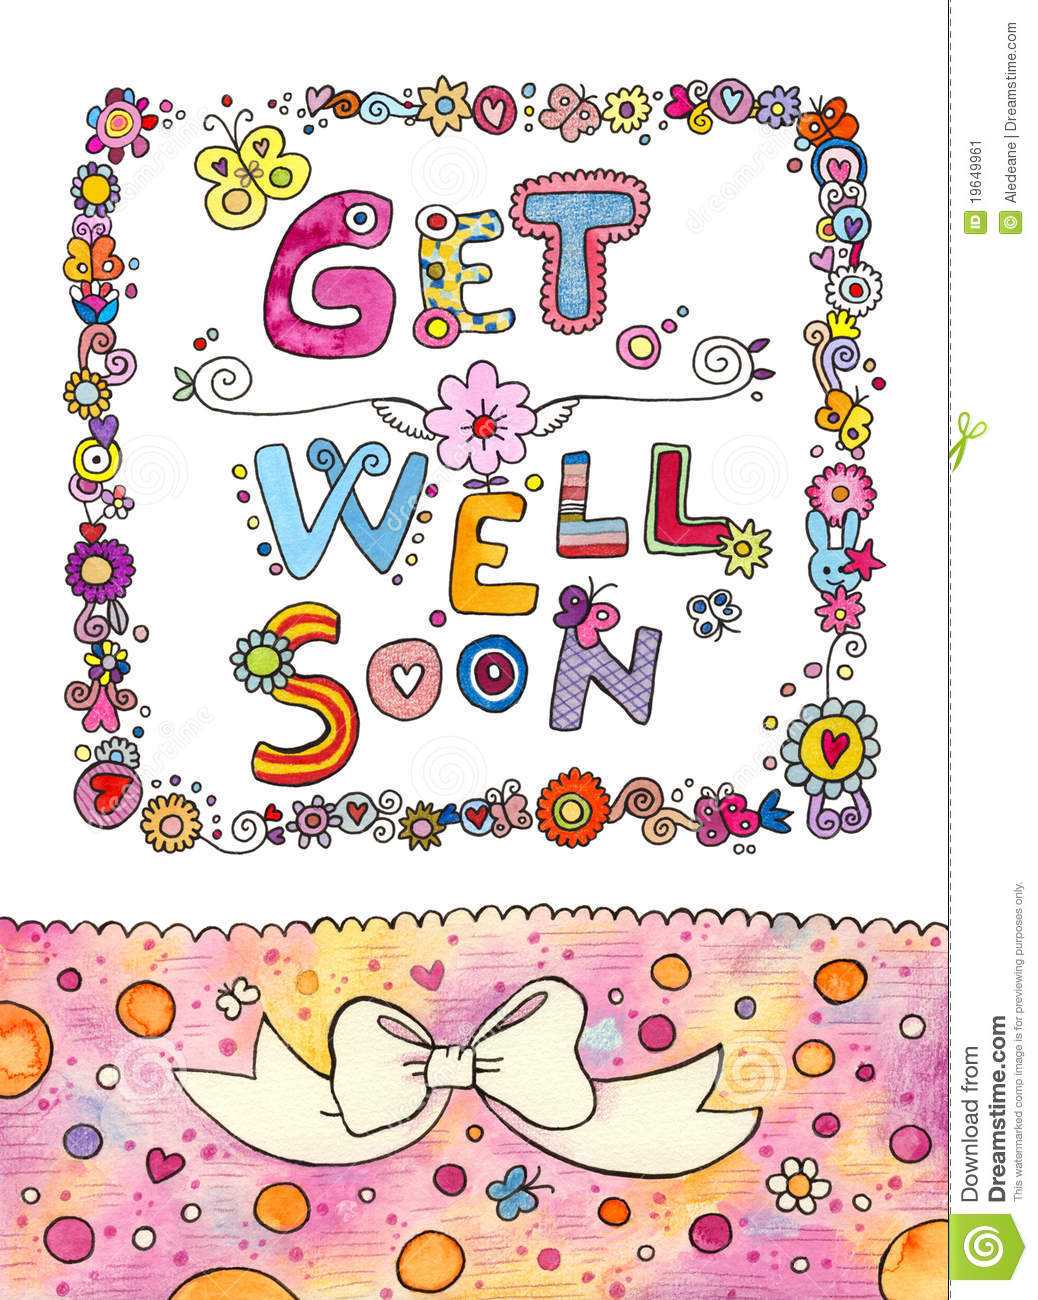 Get Well Soon Card Stock Illustration. Illustration Of With Get Well Soon Card Template